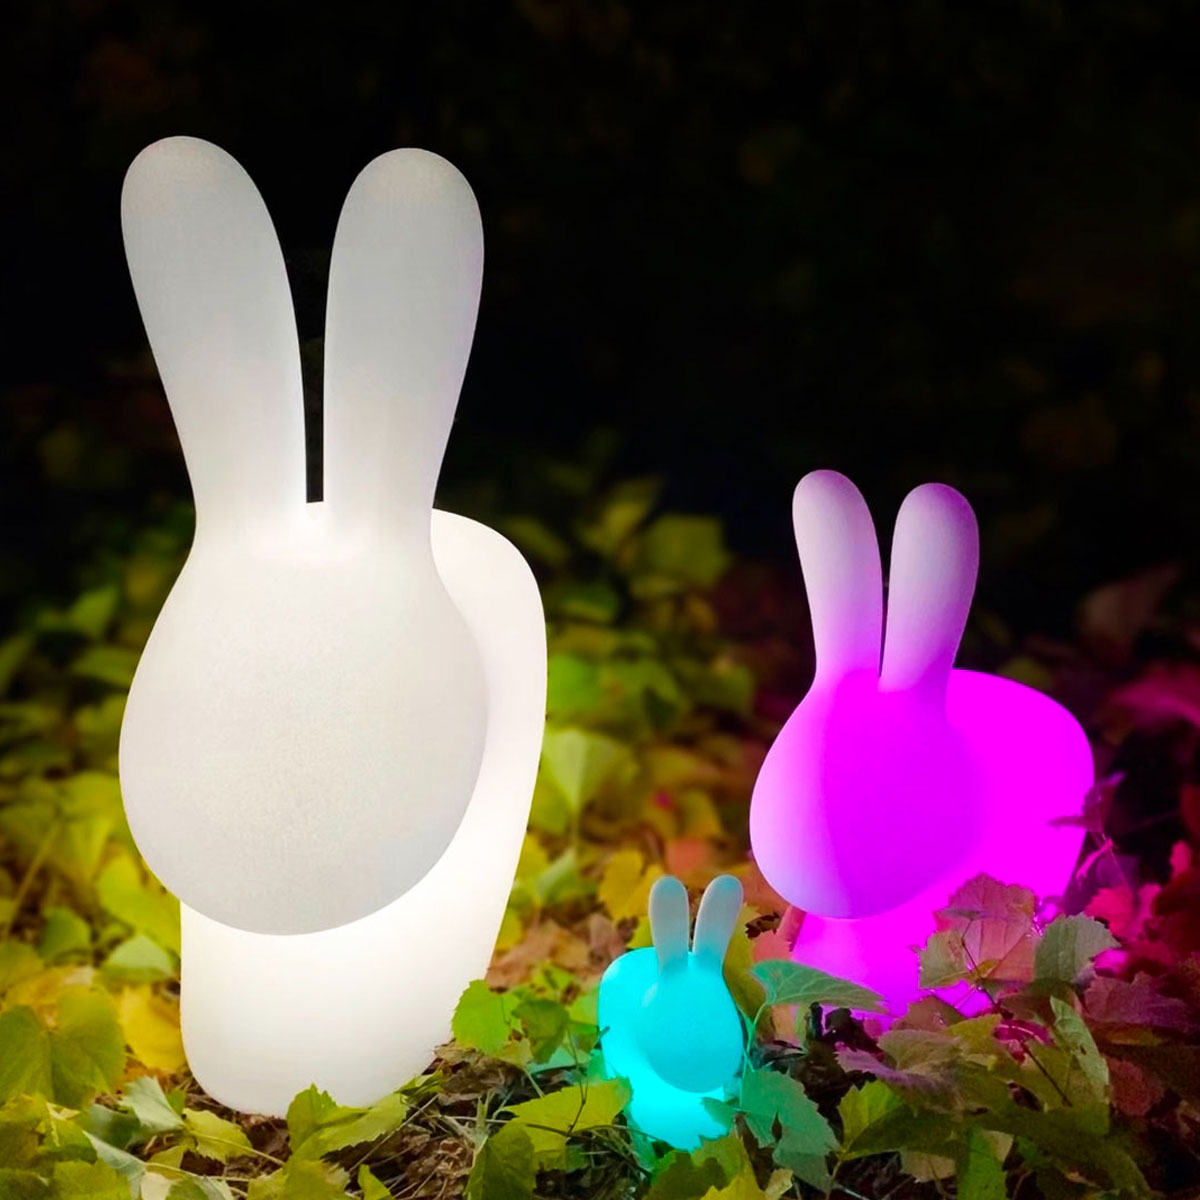 Courthouse Lamp - Qeeboo Rabbit Small Interiors Outdoor LED -